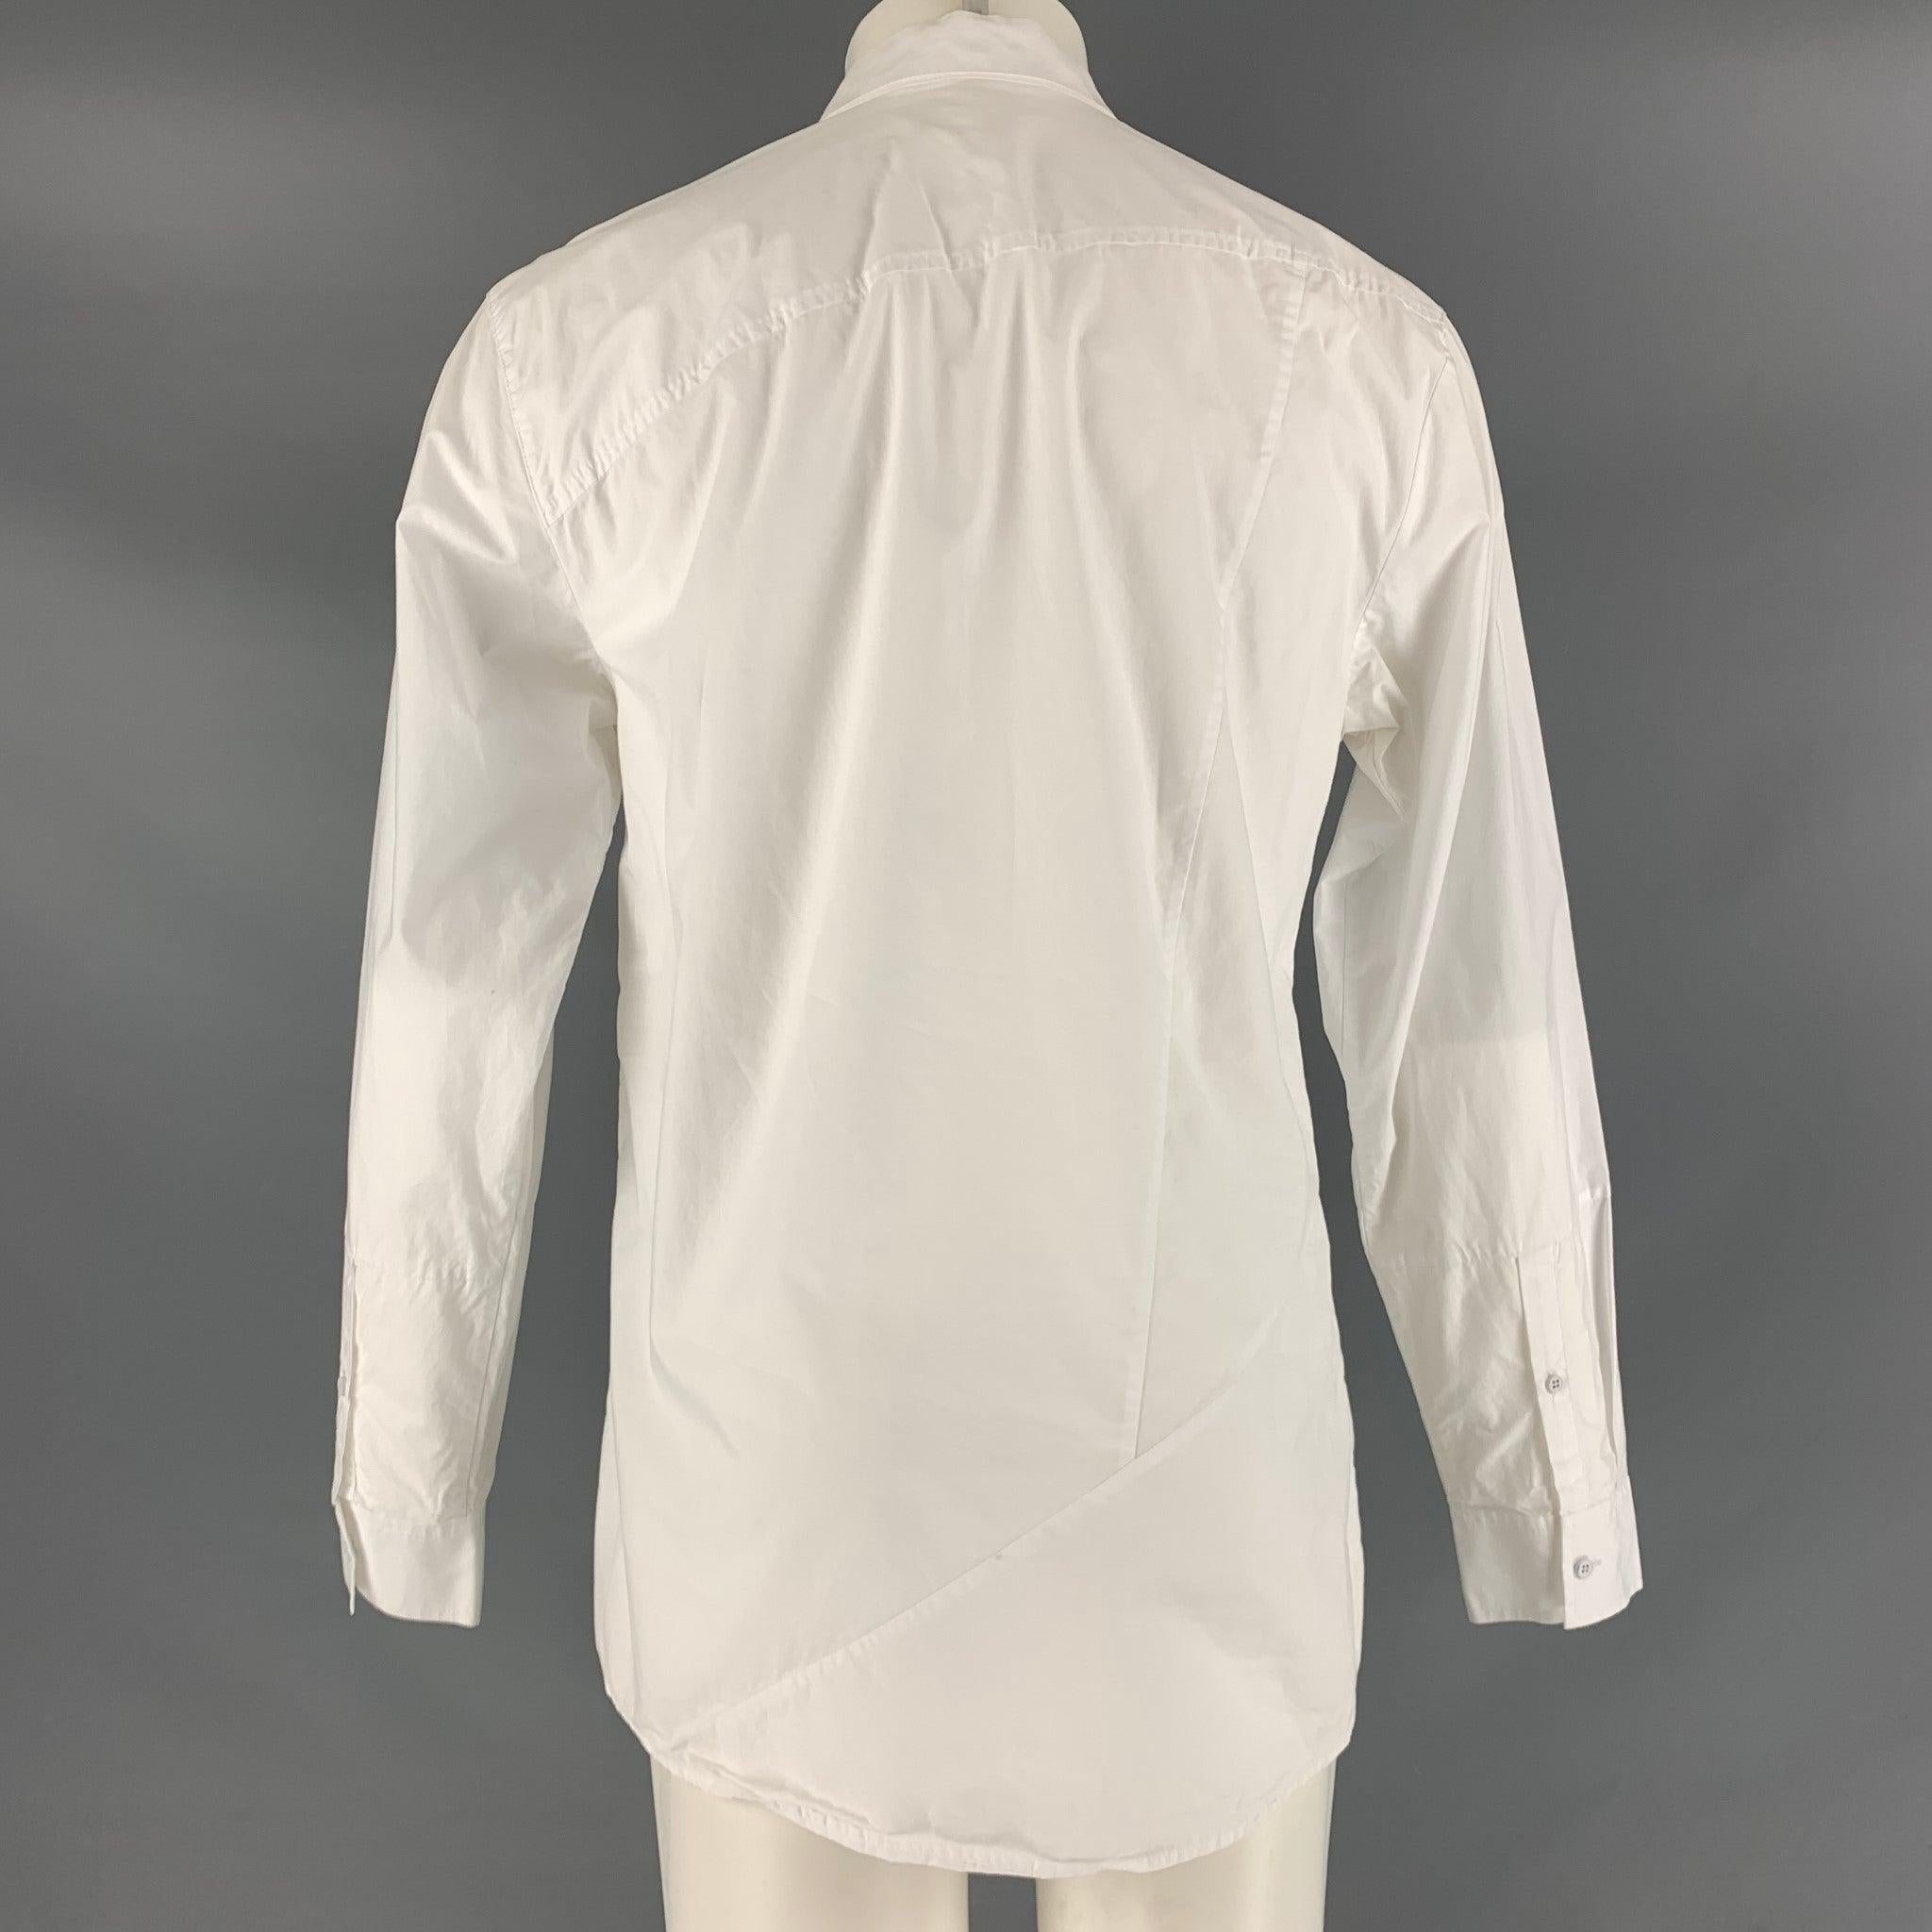 ALEXANDER WANG Size S White Solid Cotton Button Up Long Sleeve Shirt In Excellent Condition For Sale In San Francisco, CA